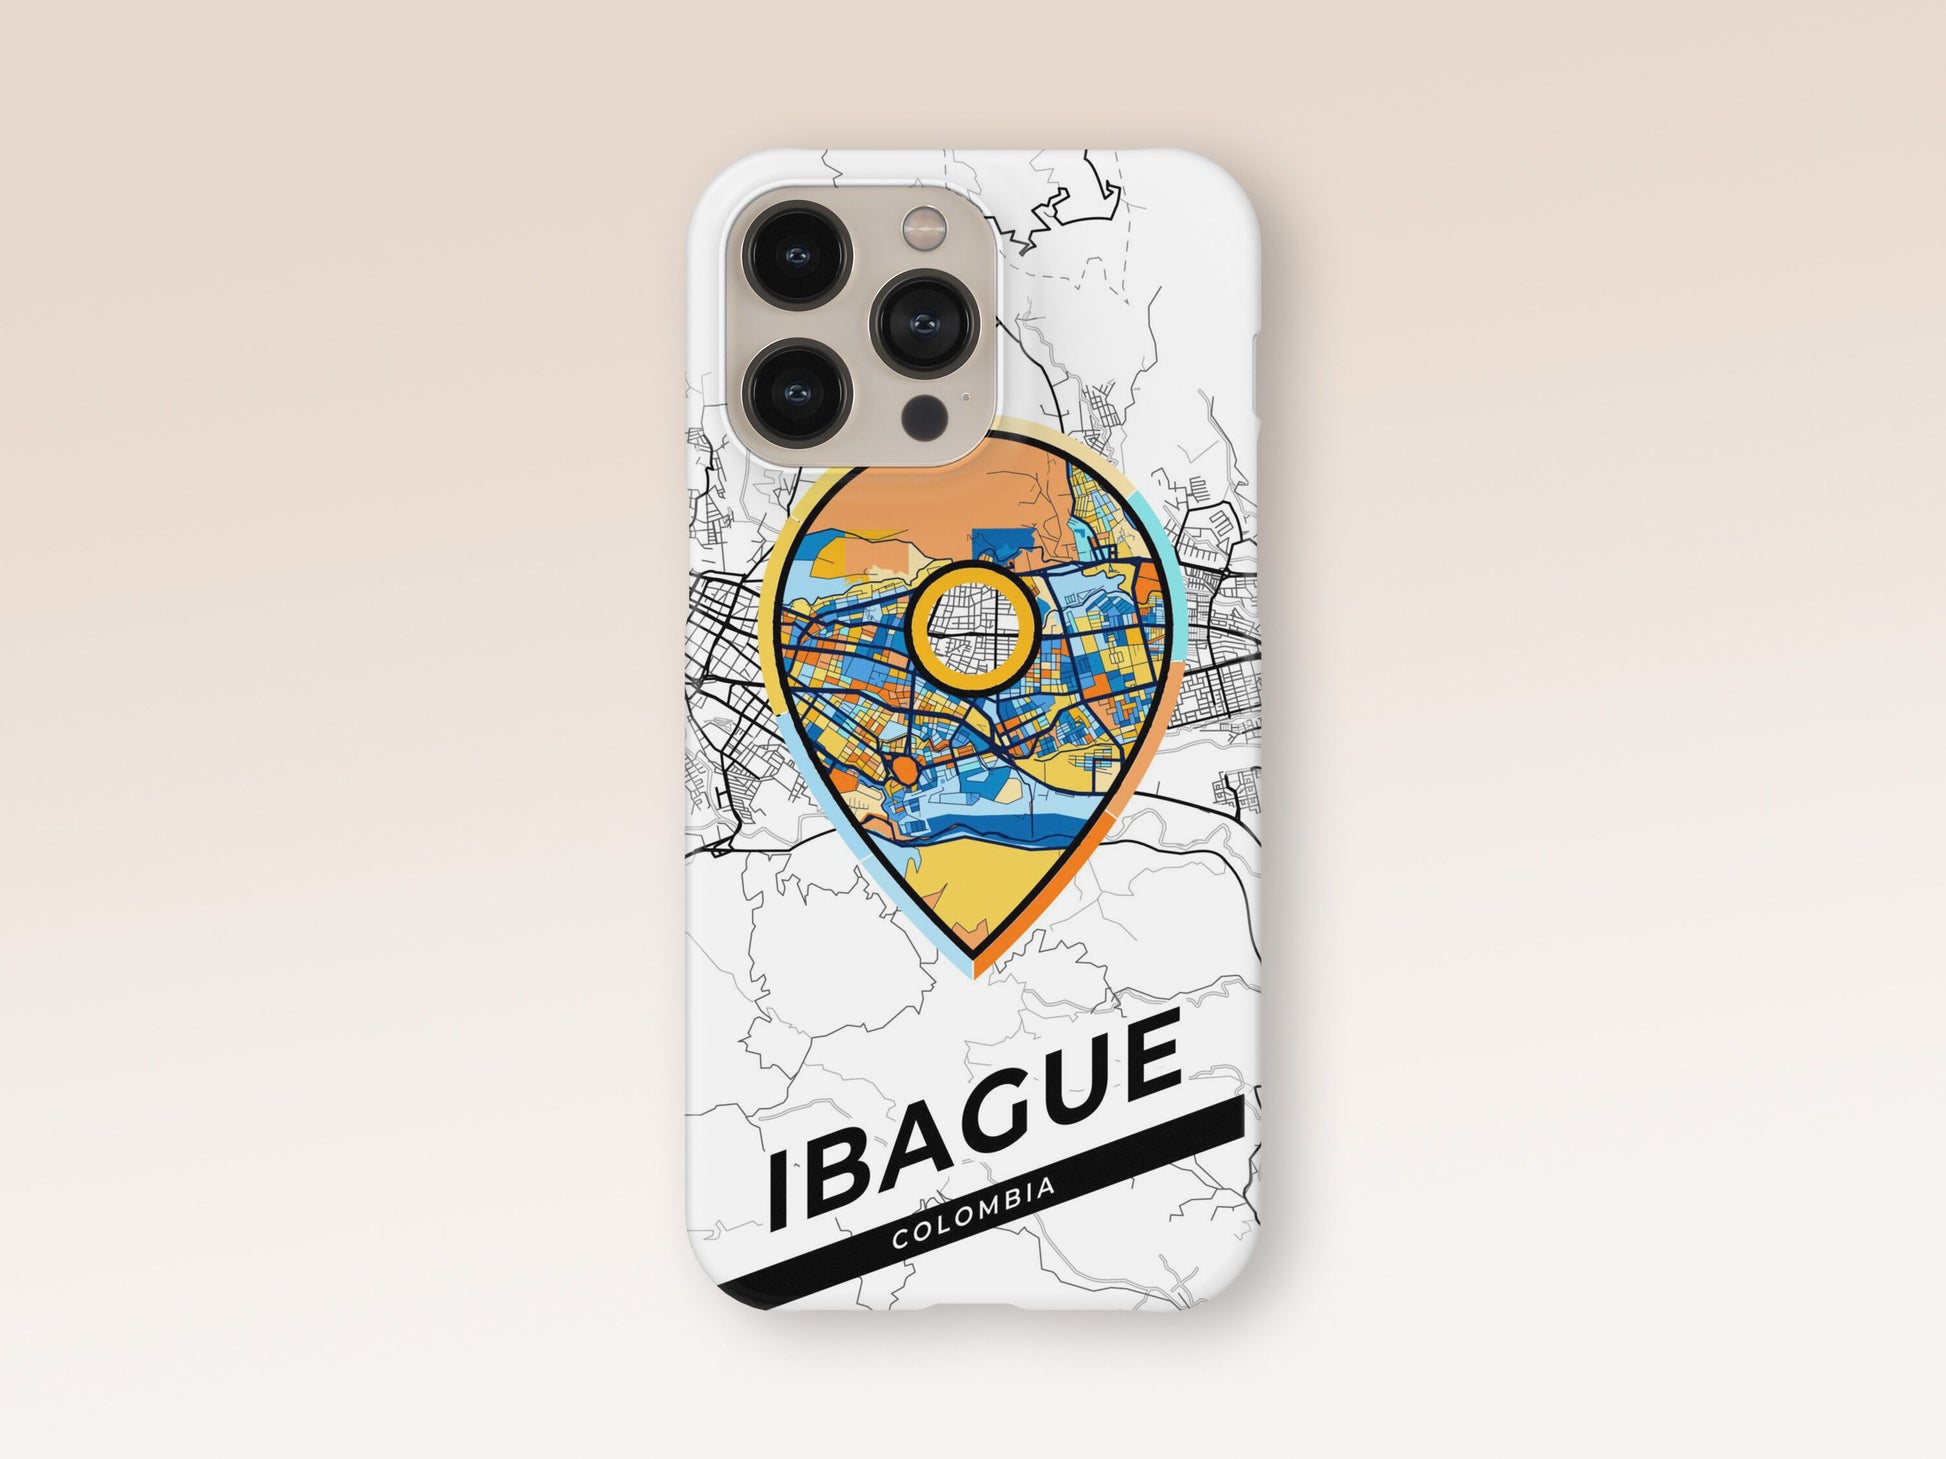 Ibague Colombia slim phone case with colorful icon. Birthday, wedding or housewarming gift. Couple match cases. 1